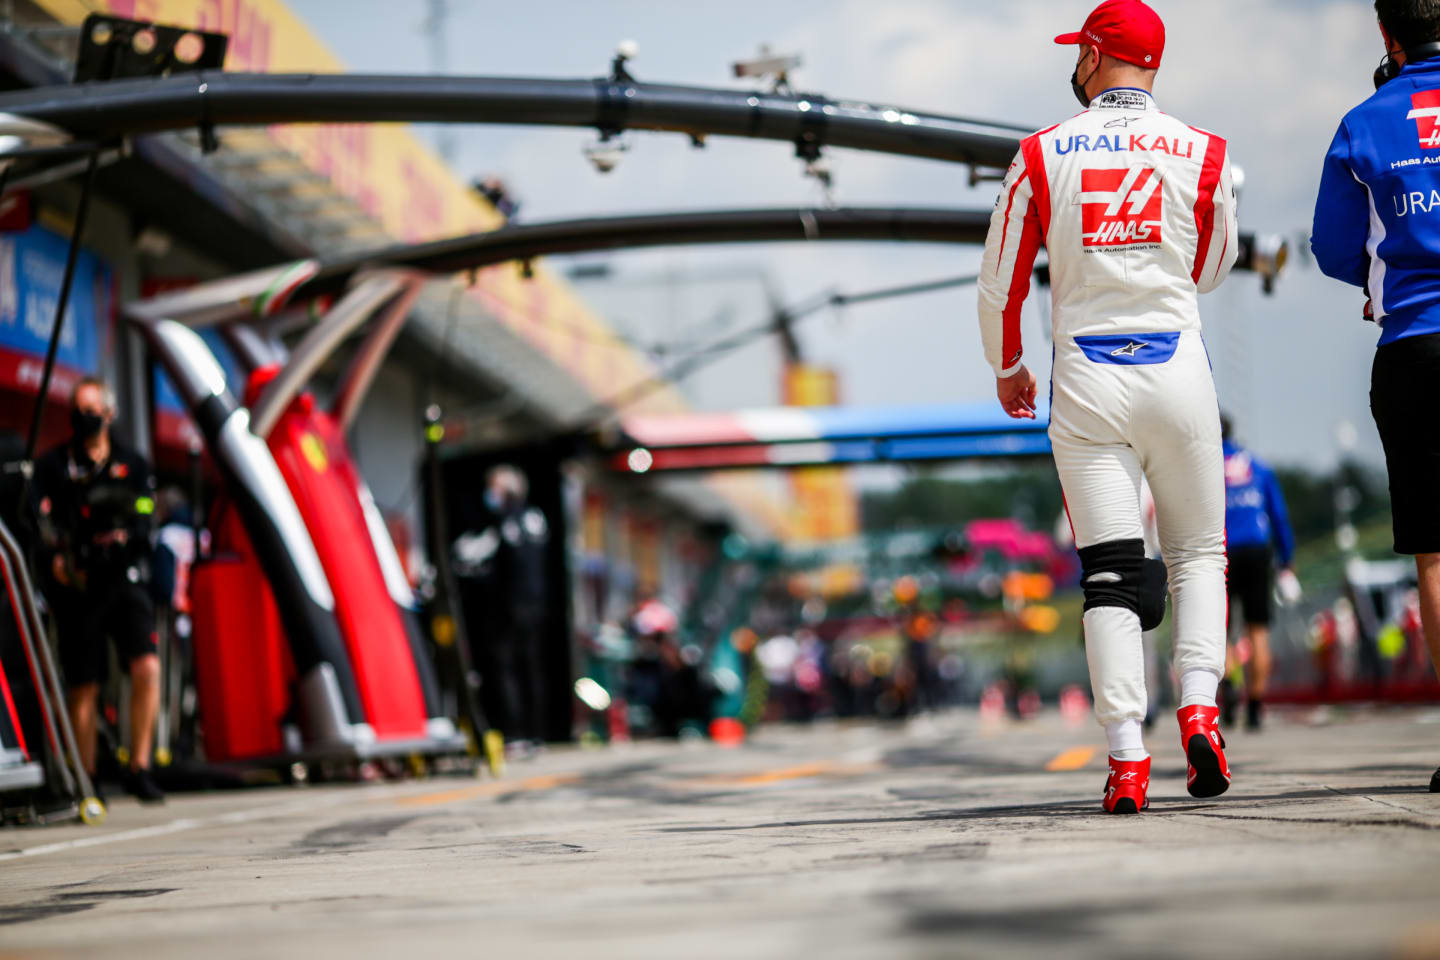 IMOLA, ITALY - APRIL 17: Nikita Mazepin of Russia and Haas  qualifying ahead of the F1 Grand Prix of Emilia Romagna at Autodromo Enzo e Dino Ferrari on April 17, 2021 in Imola, Italy. (Photo by Peter Fox/Getty Images)